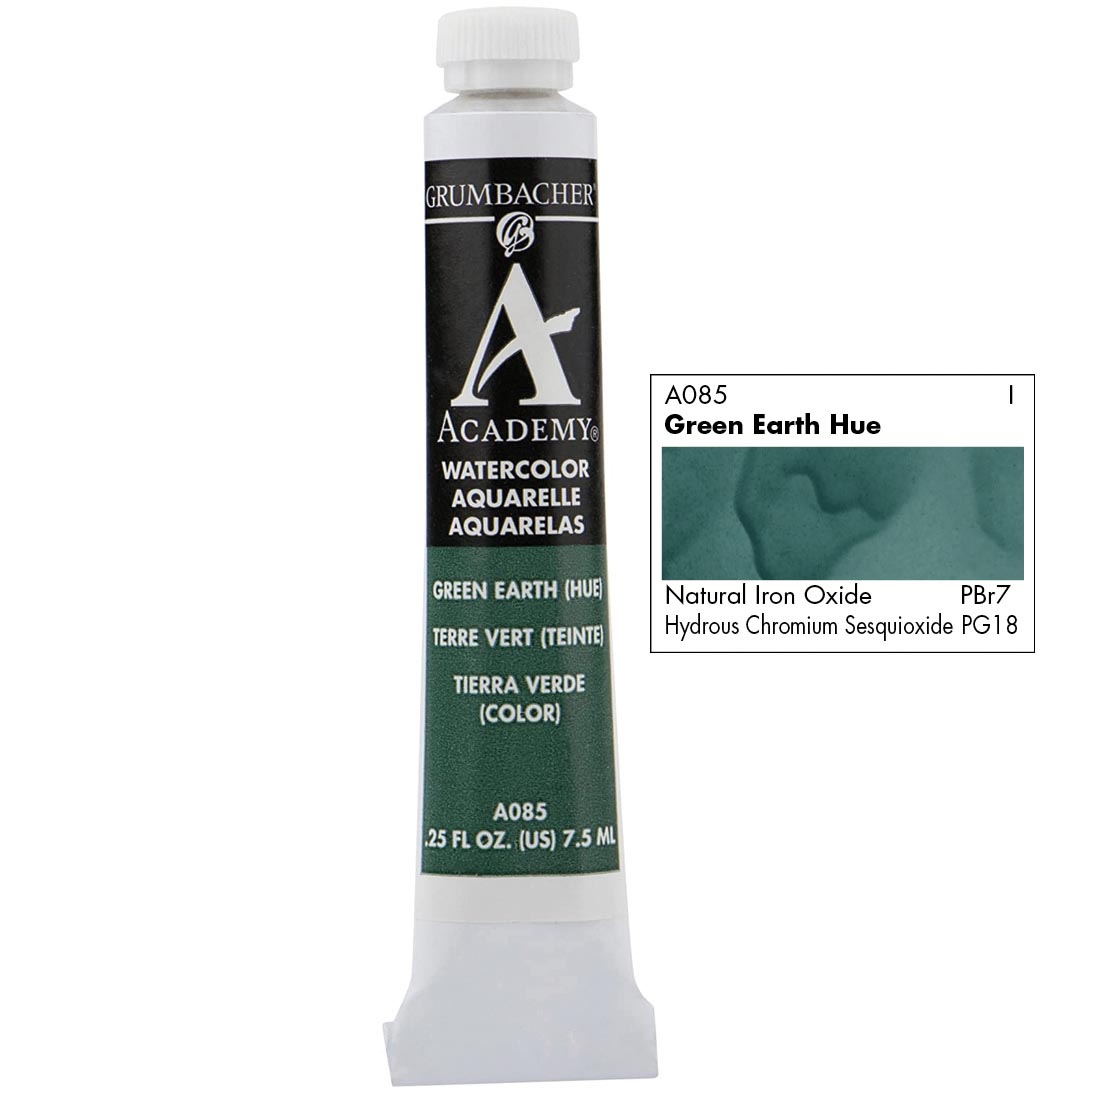 Tube of Grumbacher Academy Watercolor beside Green Earth Hue color swatch